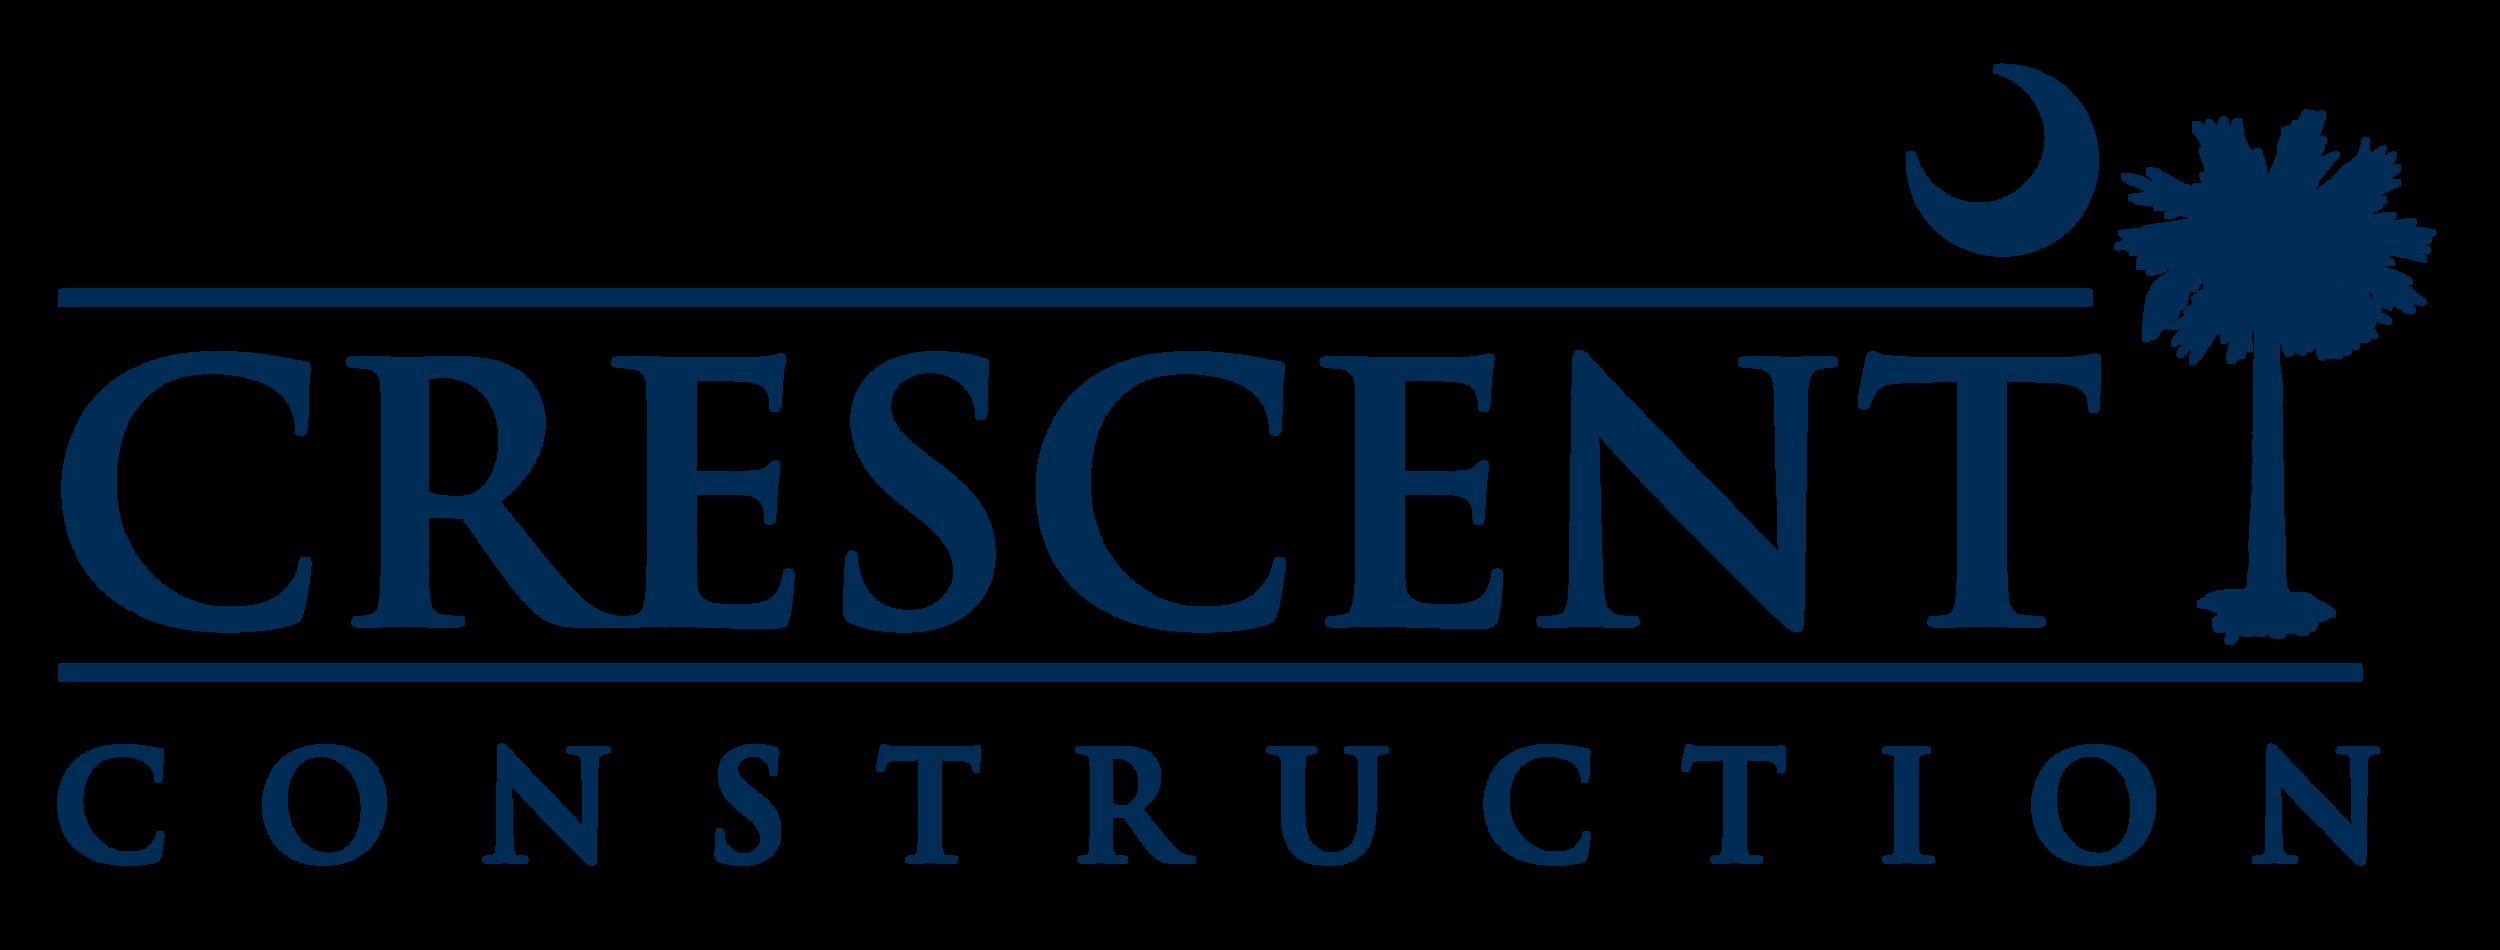 Crescent Construction roofing company in South Carolina